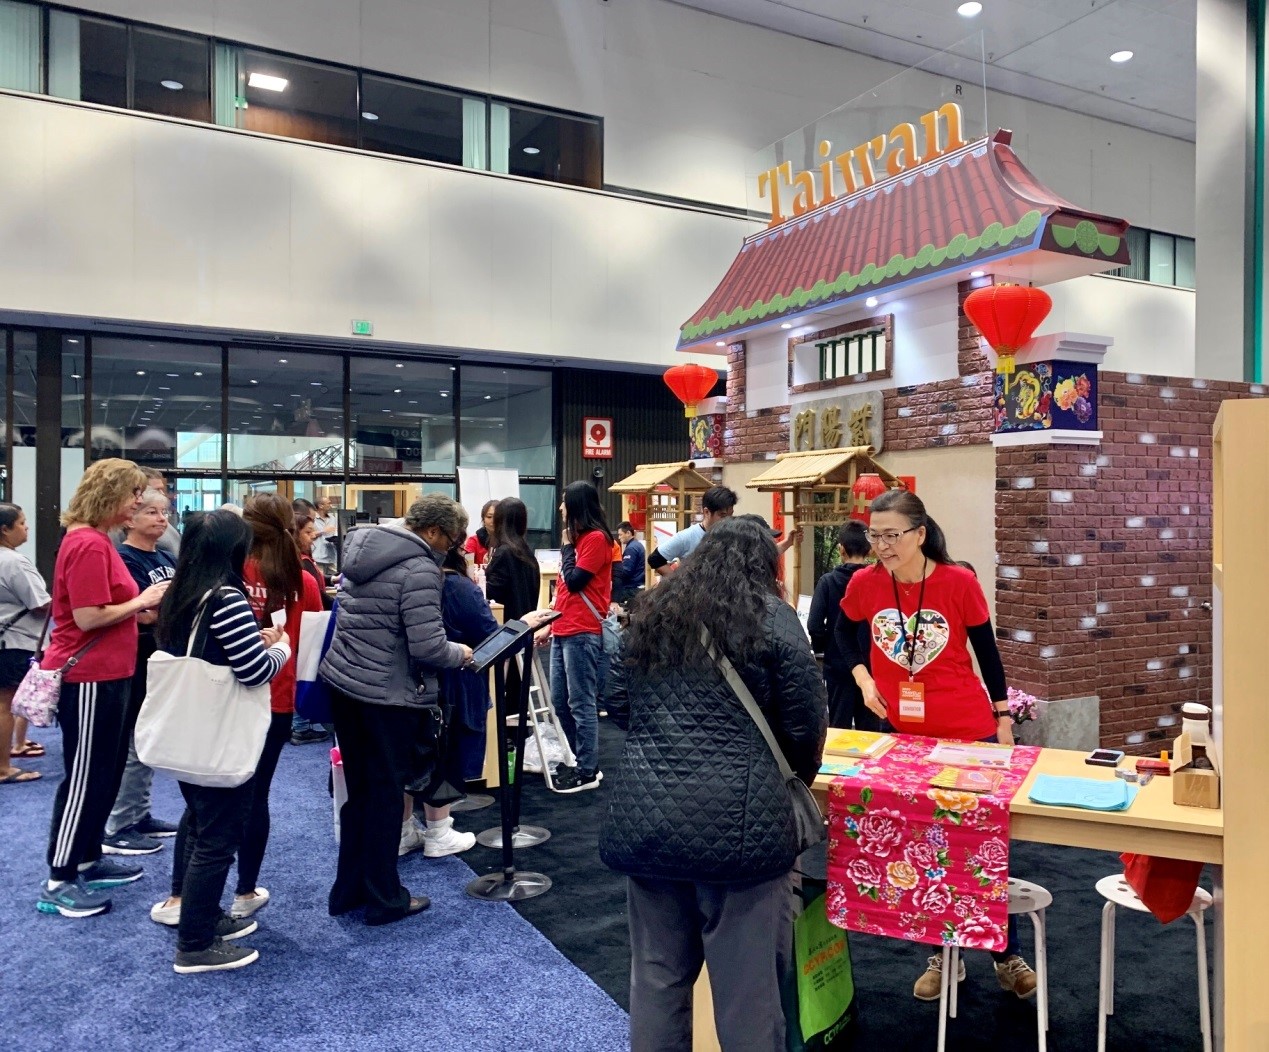 Education Division of TECO in Los Angeles Promotes Chinese Language Learning at a Travel Show